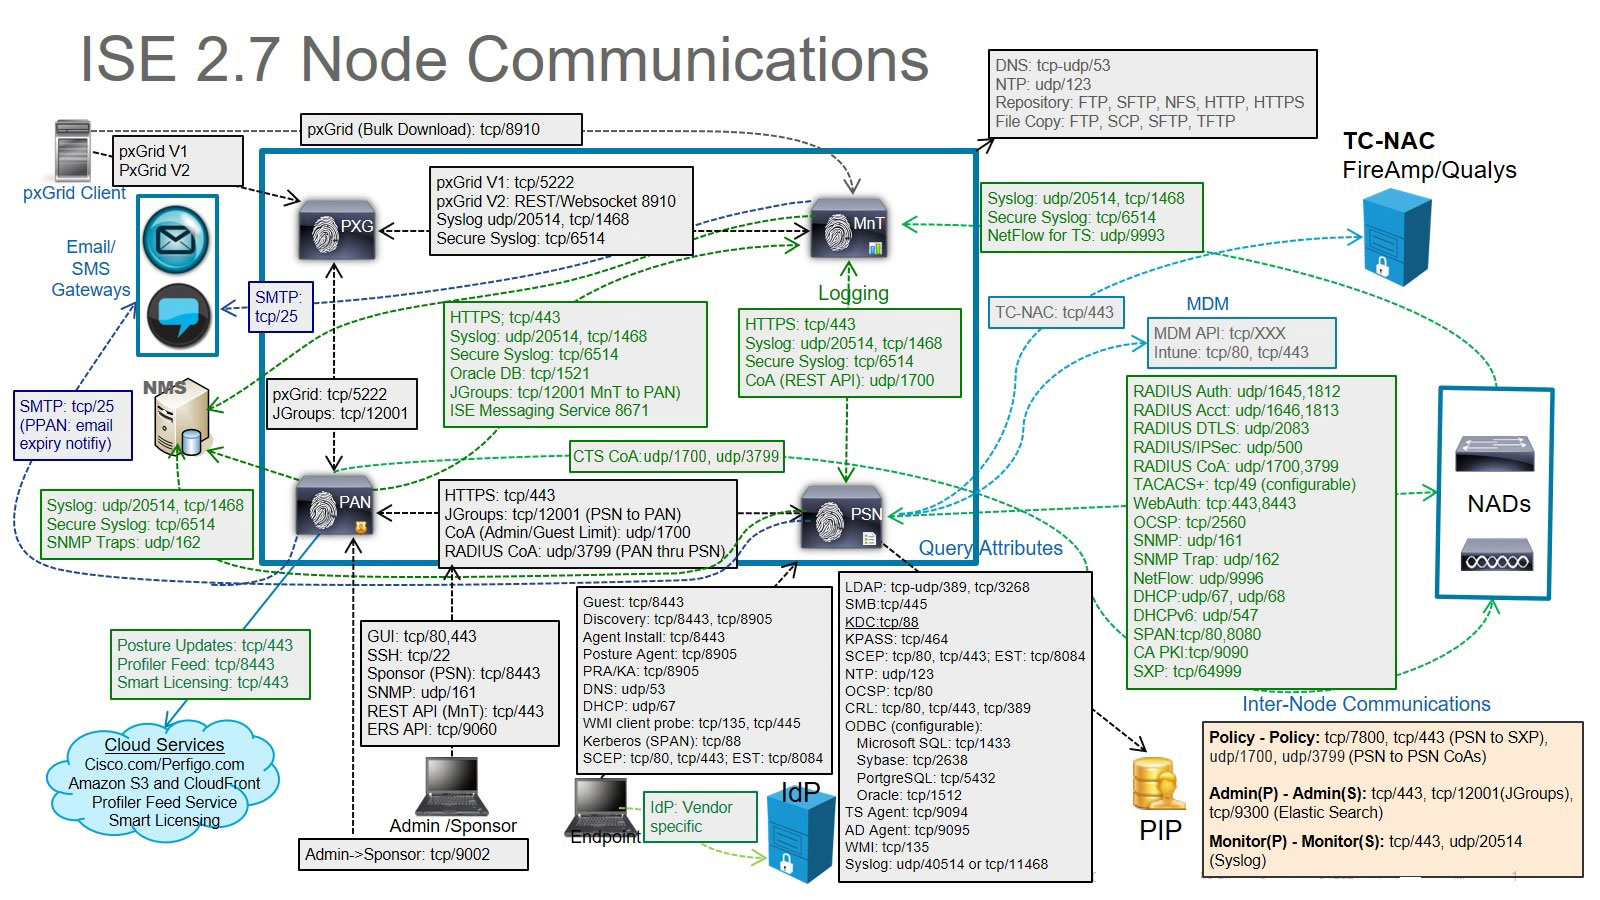 This image shows the ports used in ISE 2.7 node communications.